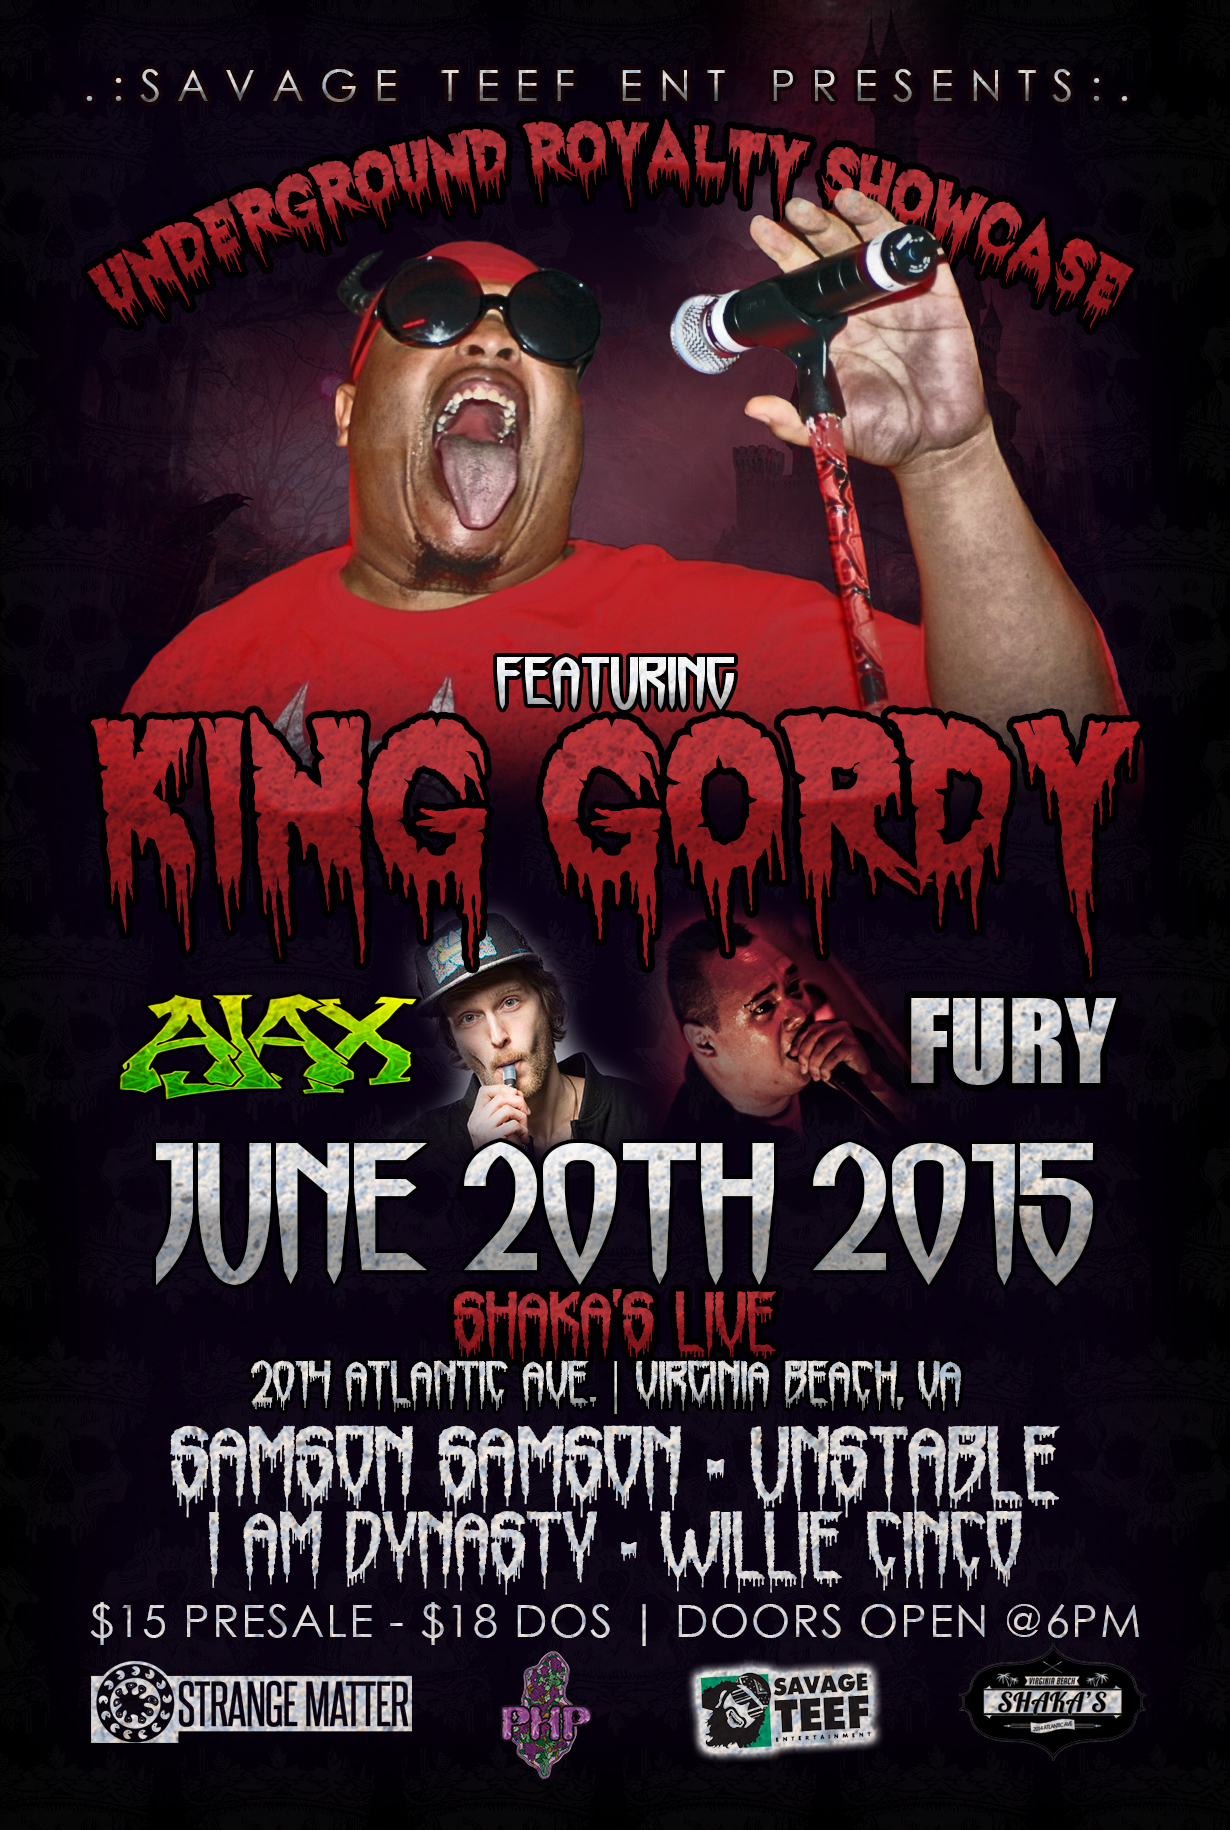 King gordy discography